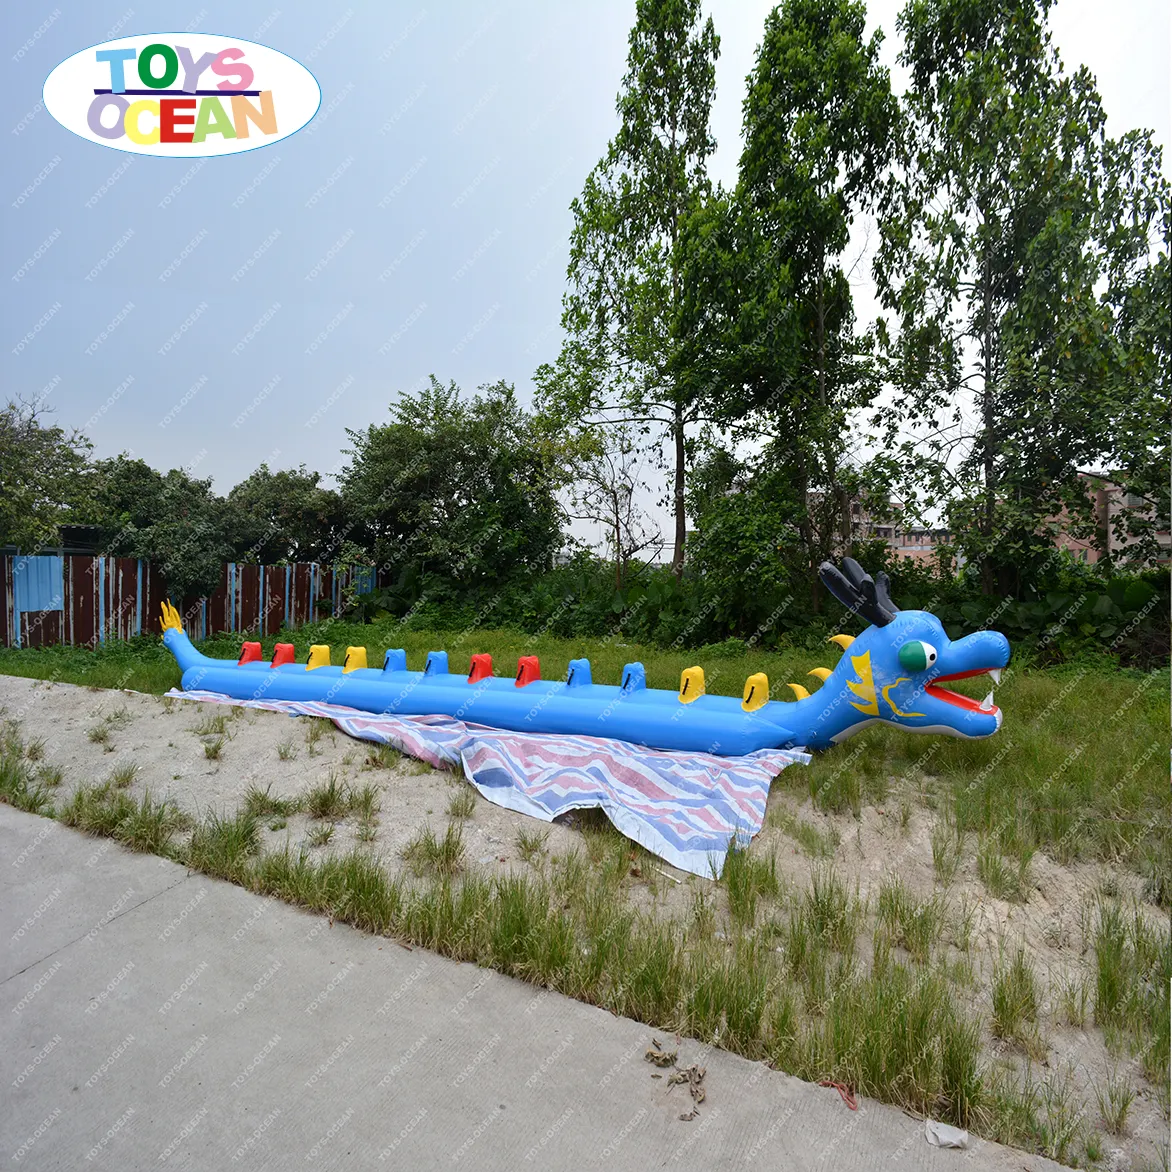 Towable Banana Boat Inflatable Dragon Boat Tubes Water Towable Sports Competition